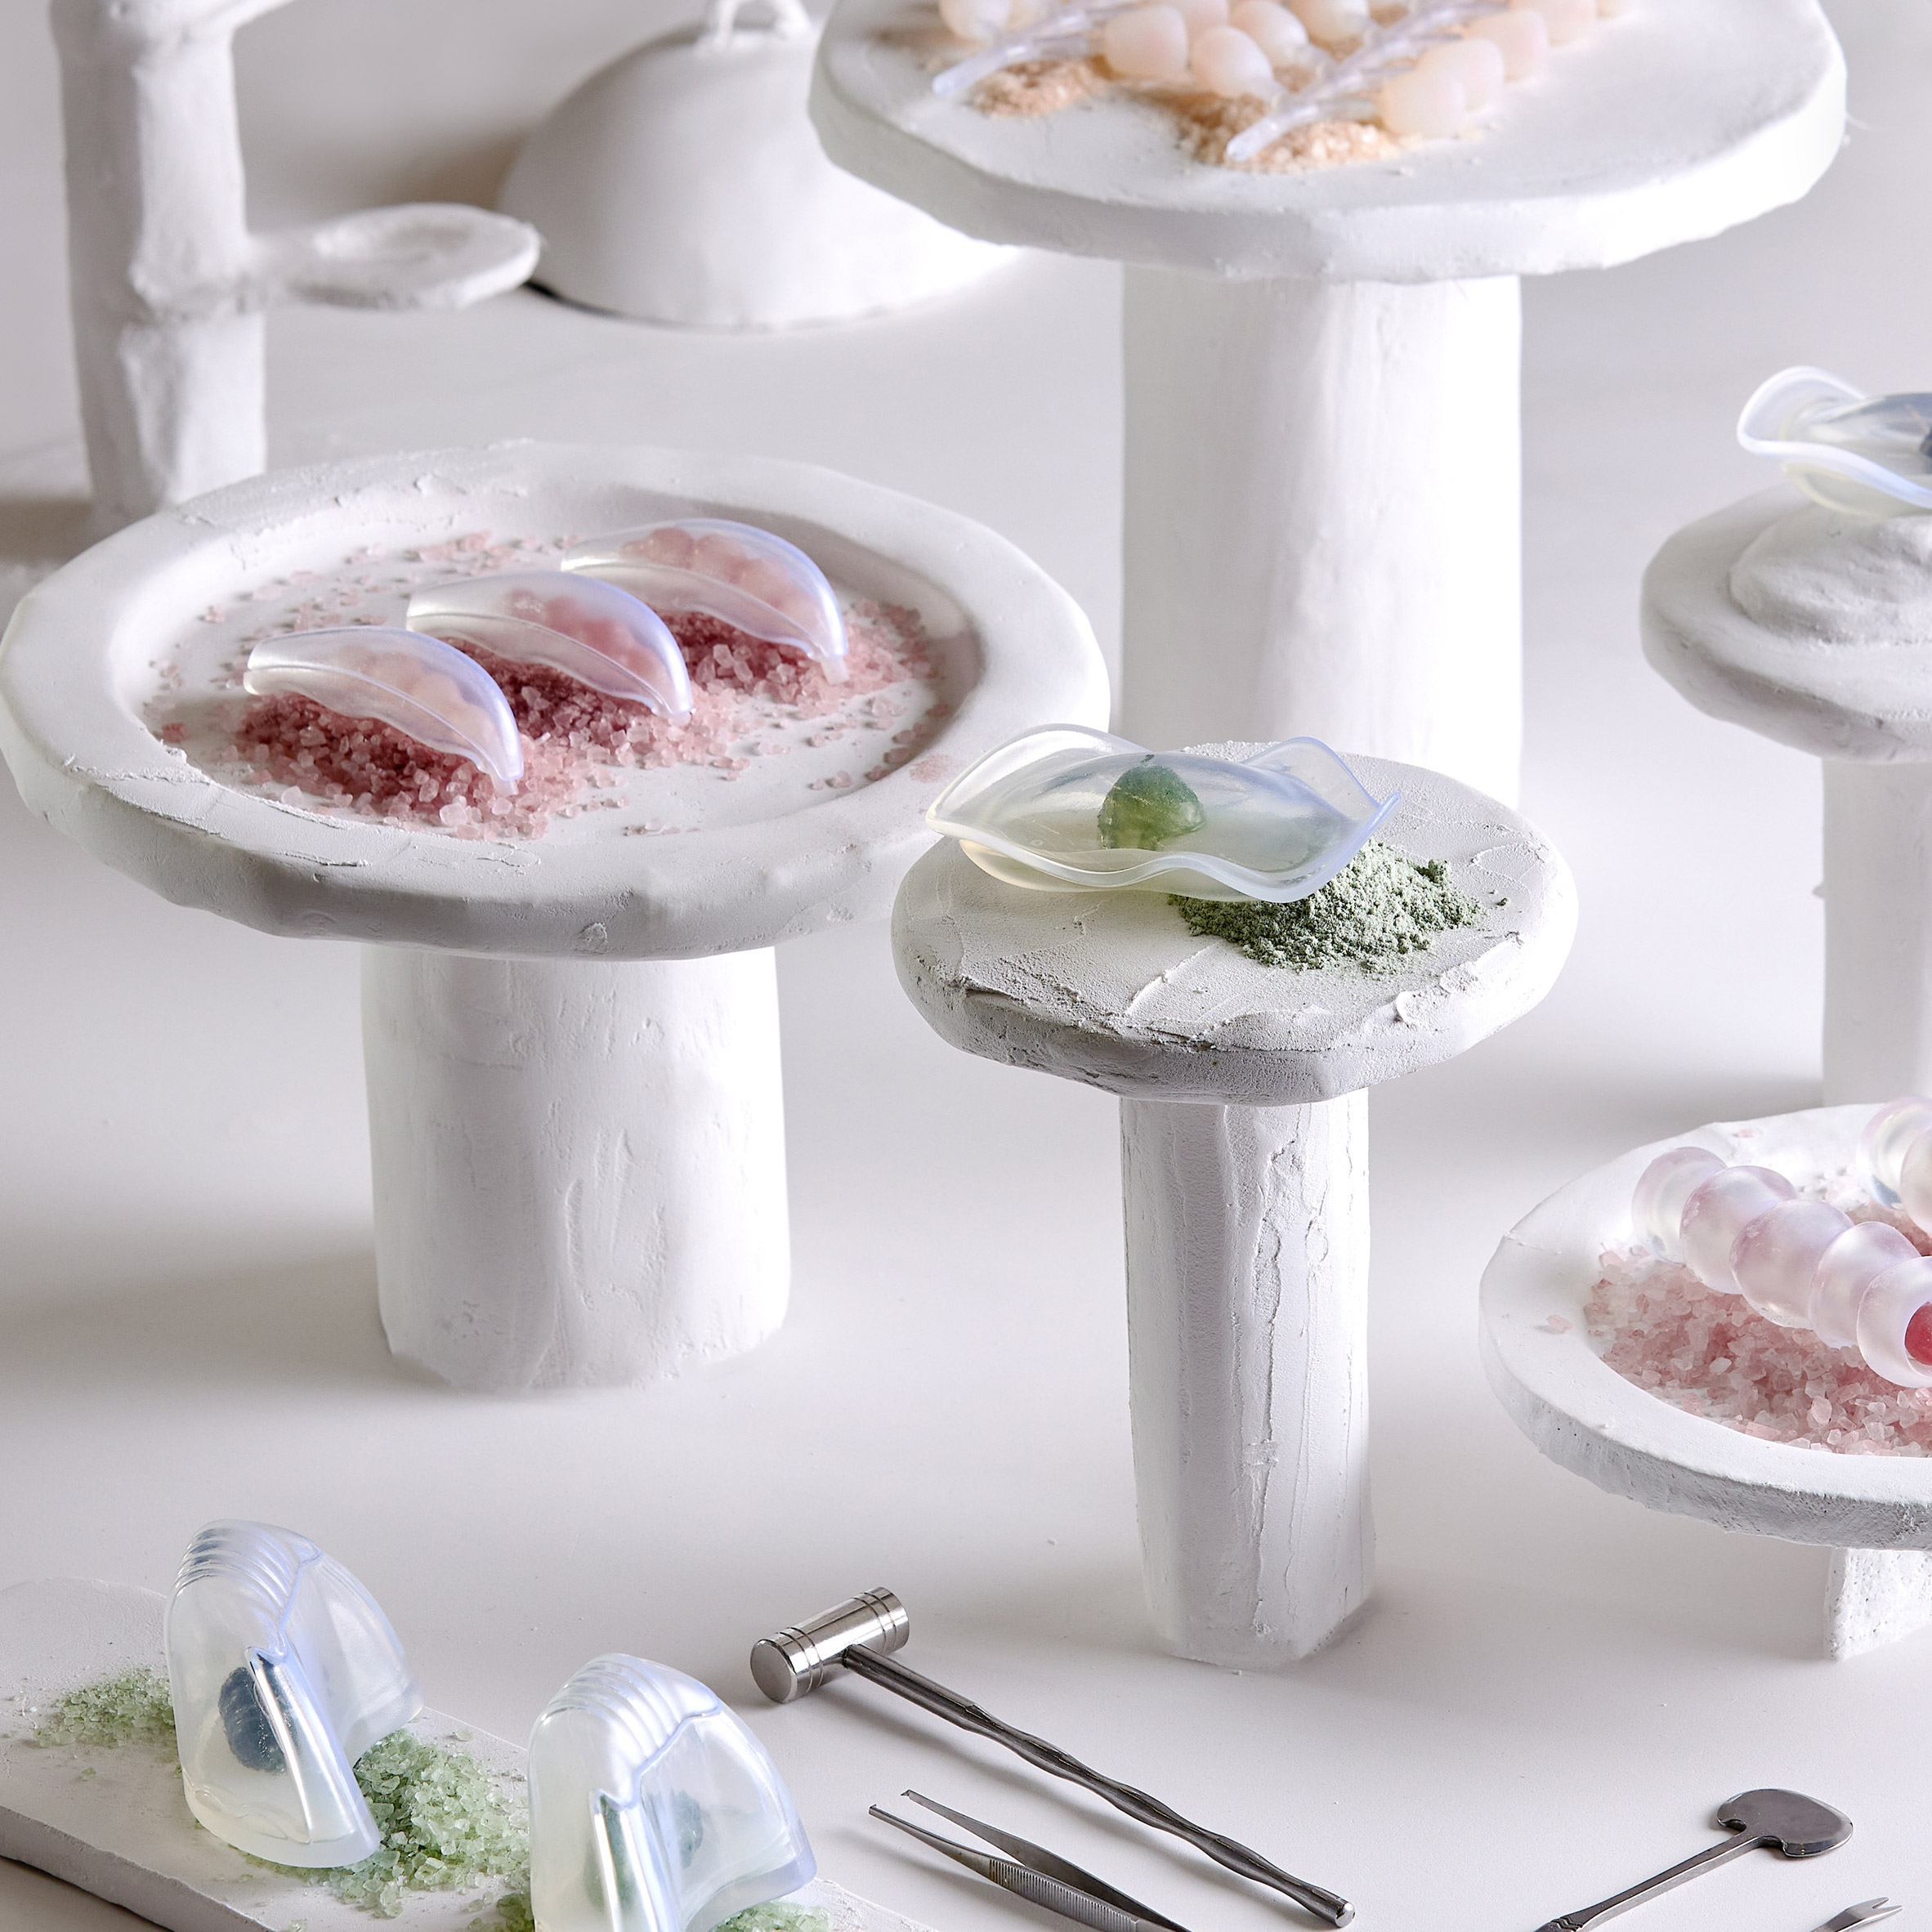 Conceptual design project featuring materials that resemble sushi